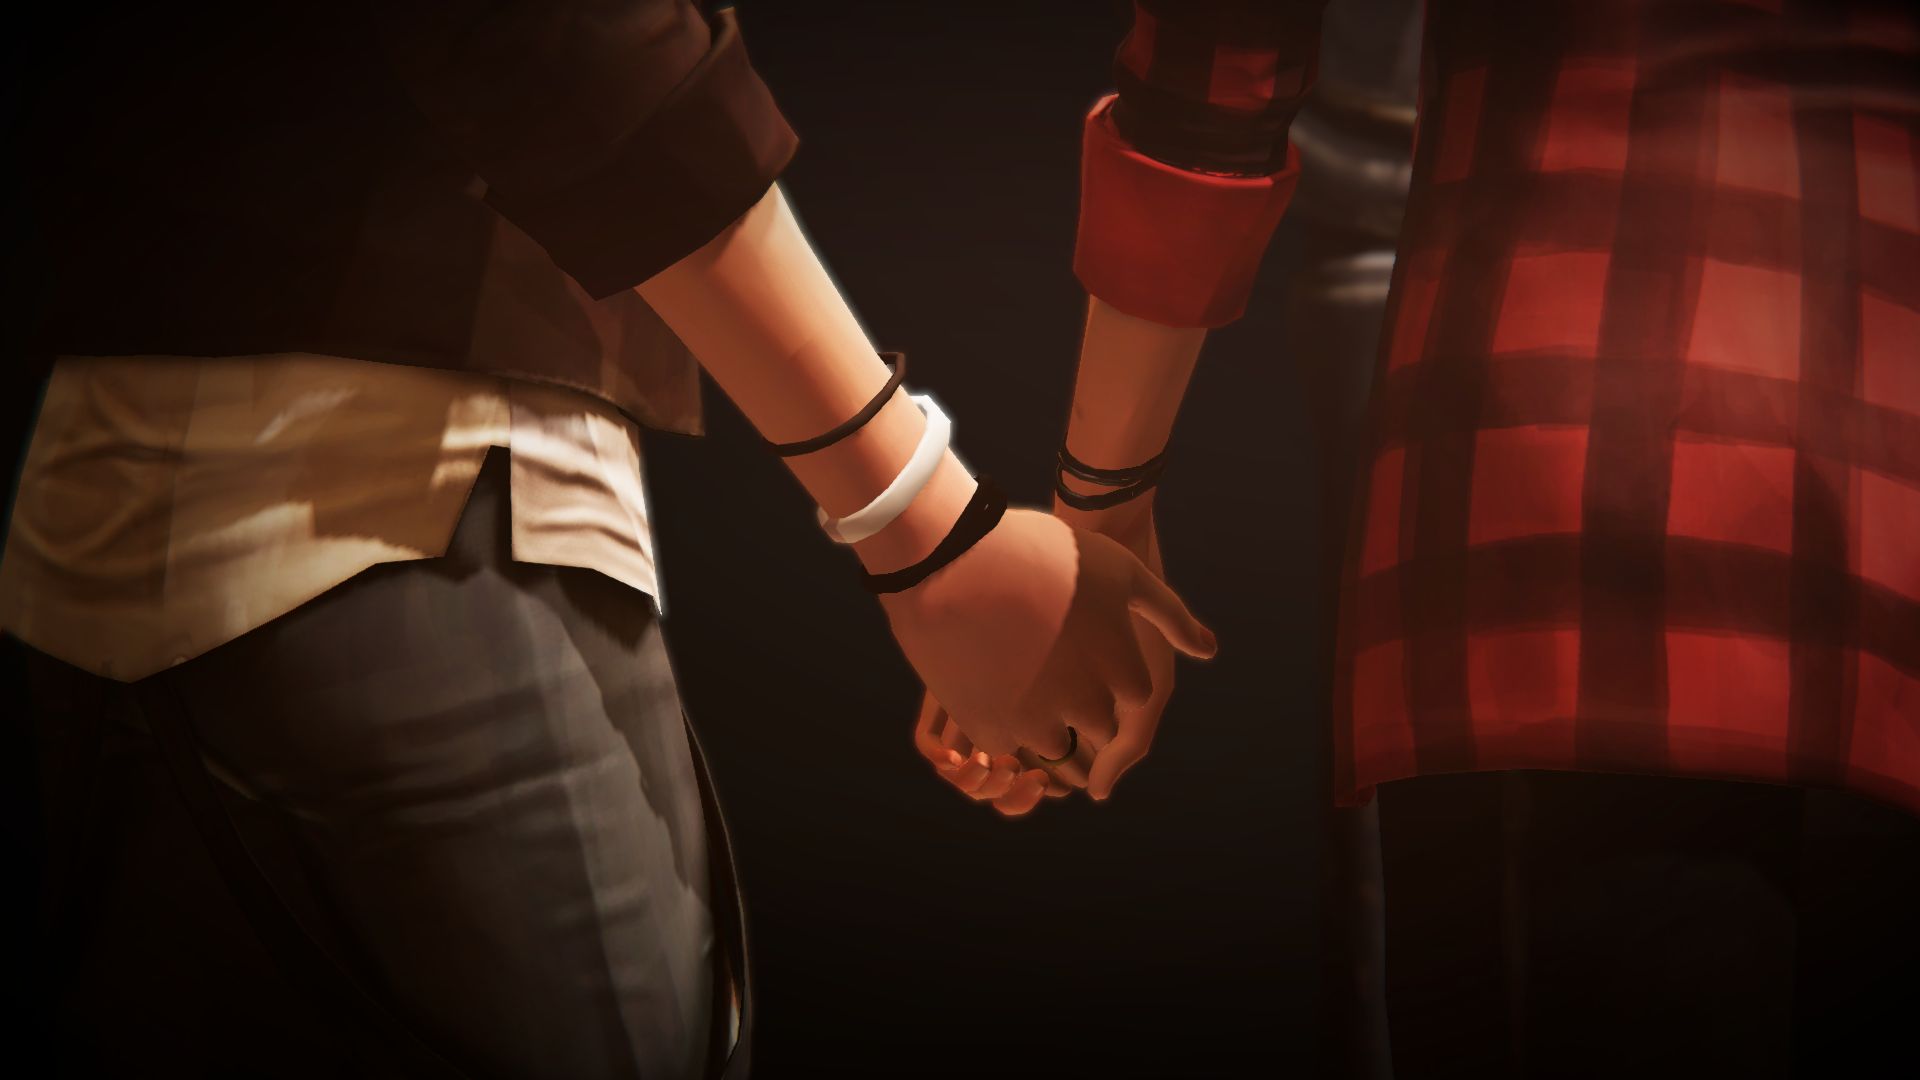 video game, life is strange: before the storm, life is strange